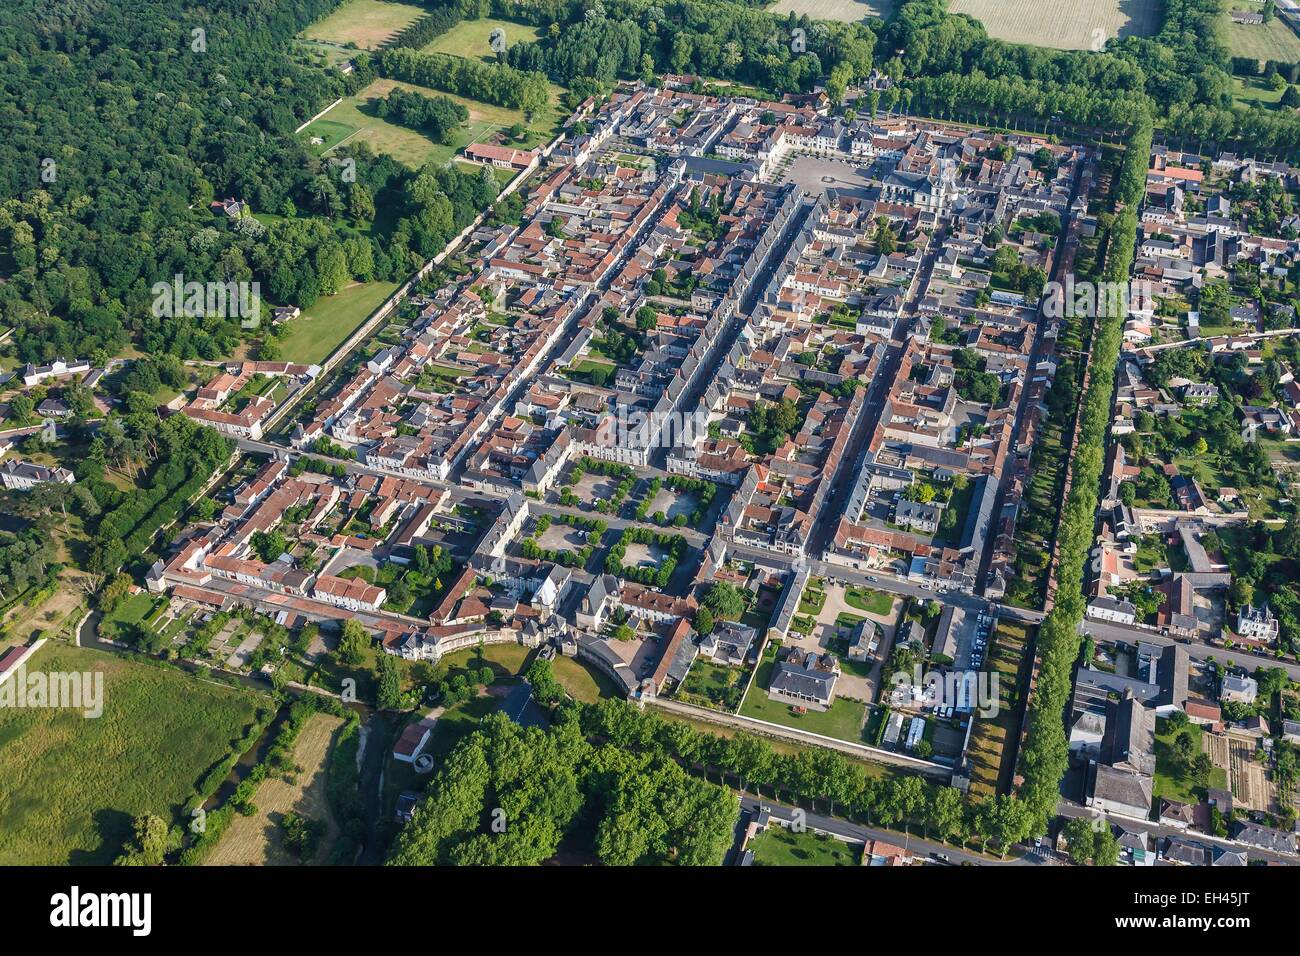 France, Indre et Loire, Richelieu, the town, typical 17th century town  organisation and architecture (aerial view Stock Photo - Alamy